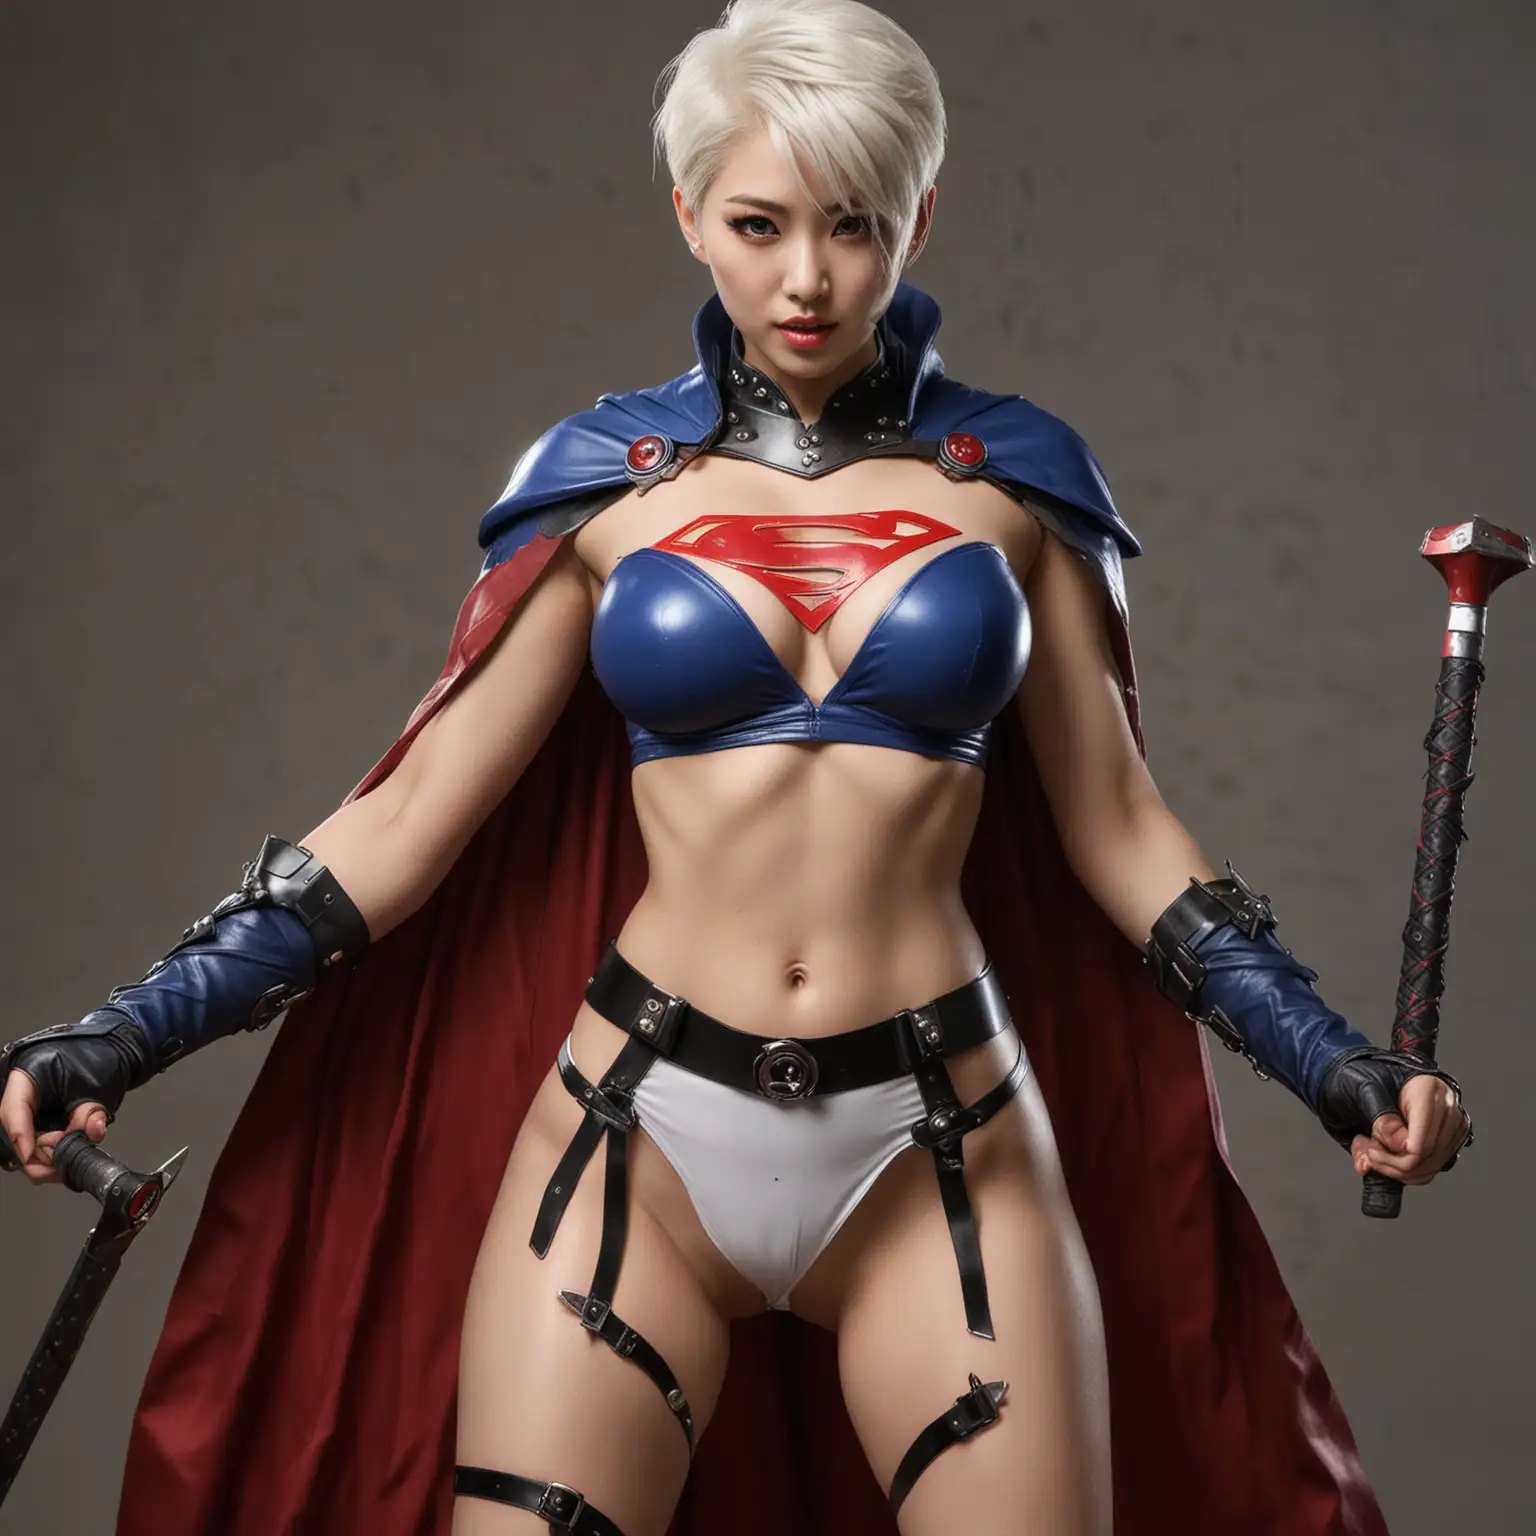 fighter korean supergirl large naked breasts lean body dominatrix panty and bra cape white short hair mohawk shield and warhammers eyepaint